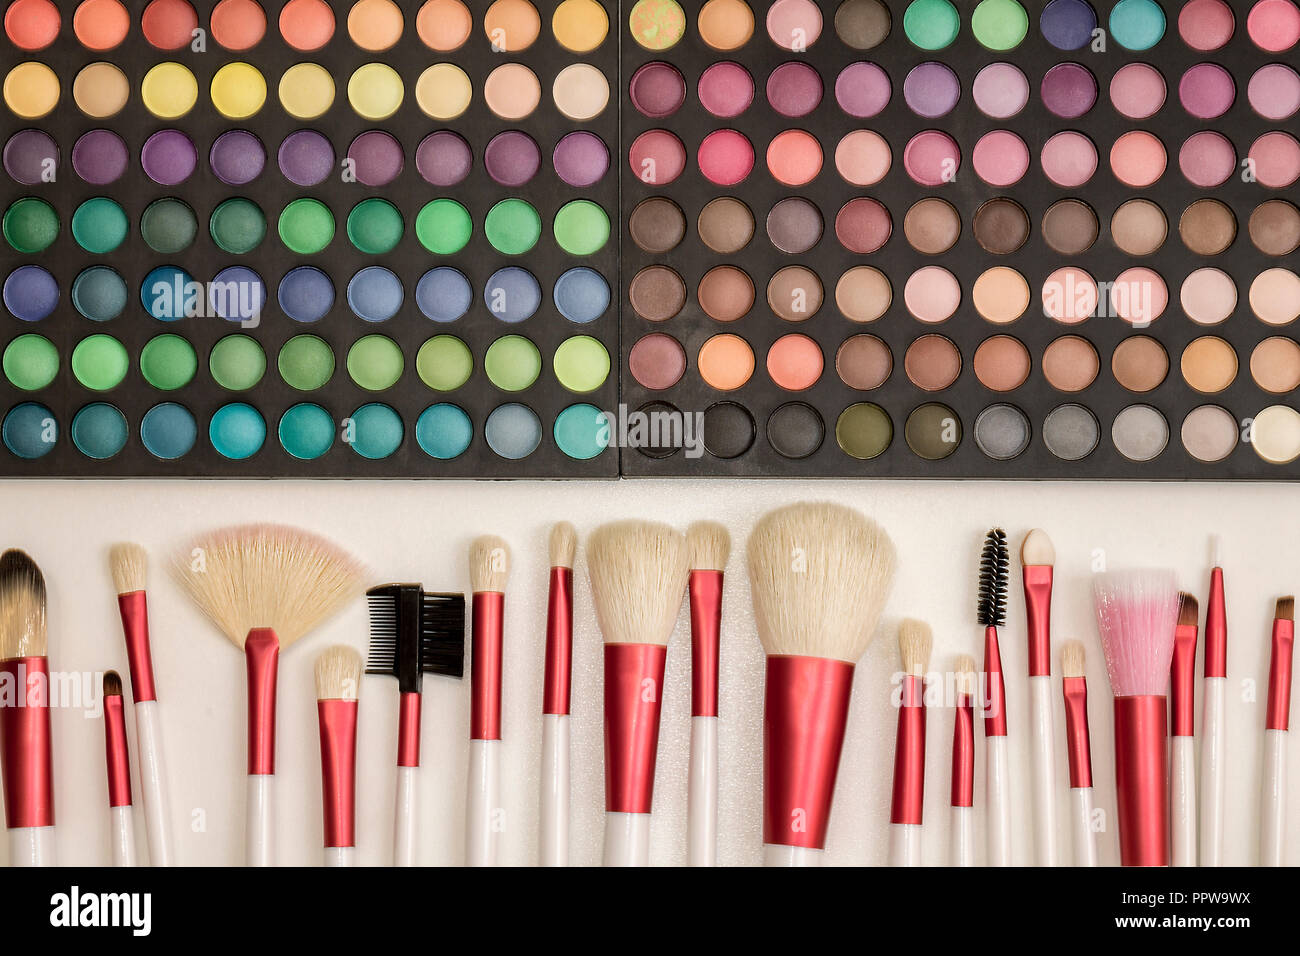 Colorful makeup set of eye shadows and brushes Stock Photo